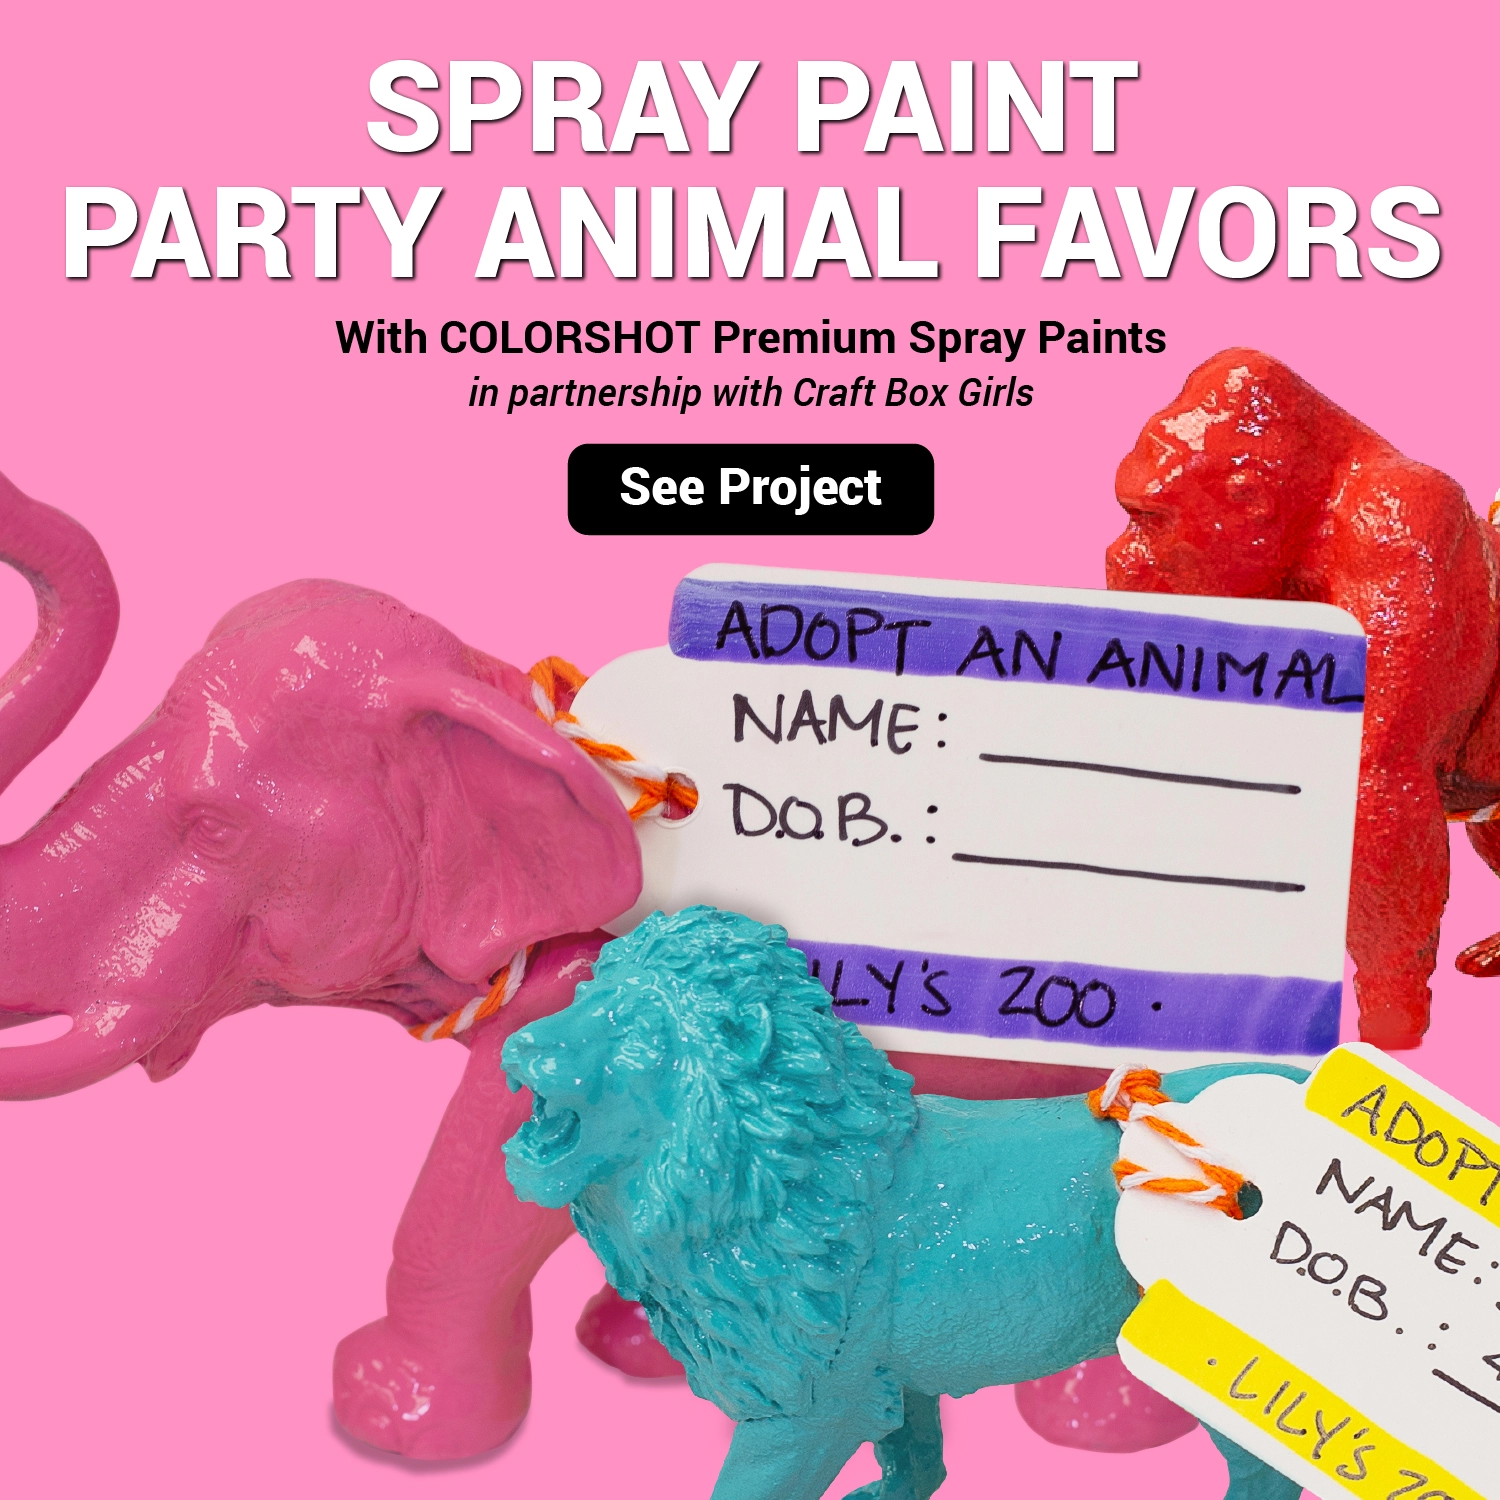 Spray Paint Animal Party Favors